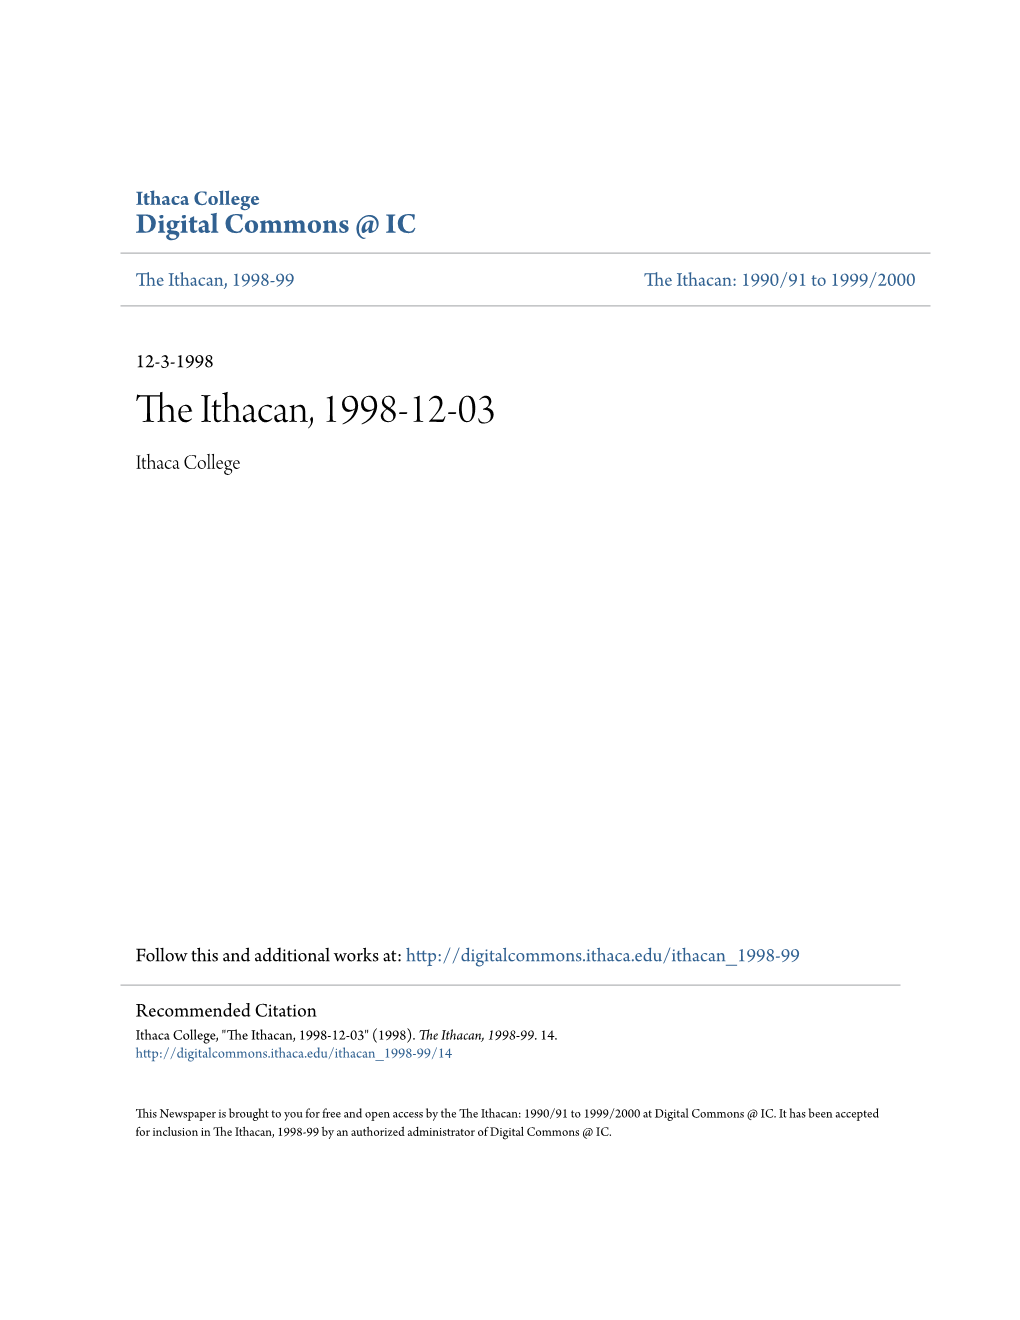 The Ithacan, 1998-12-03